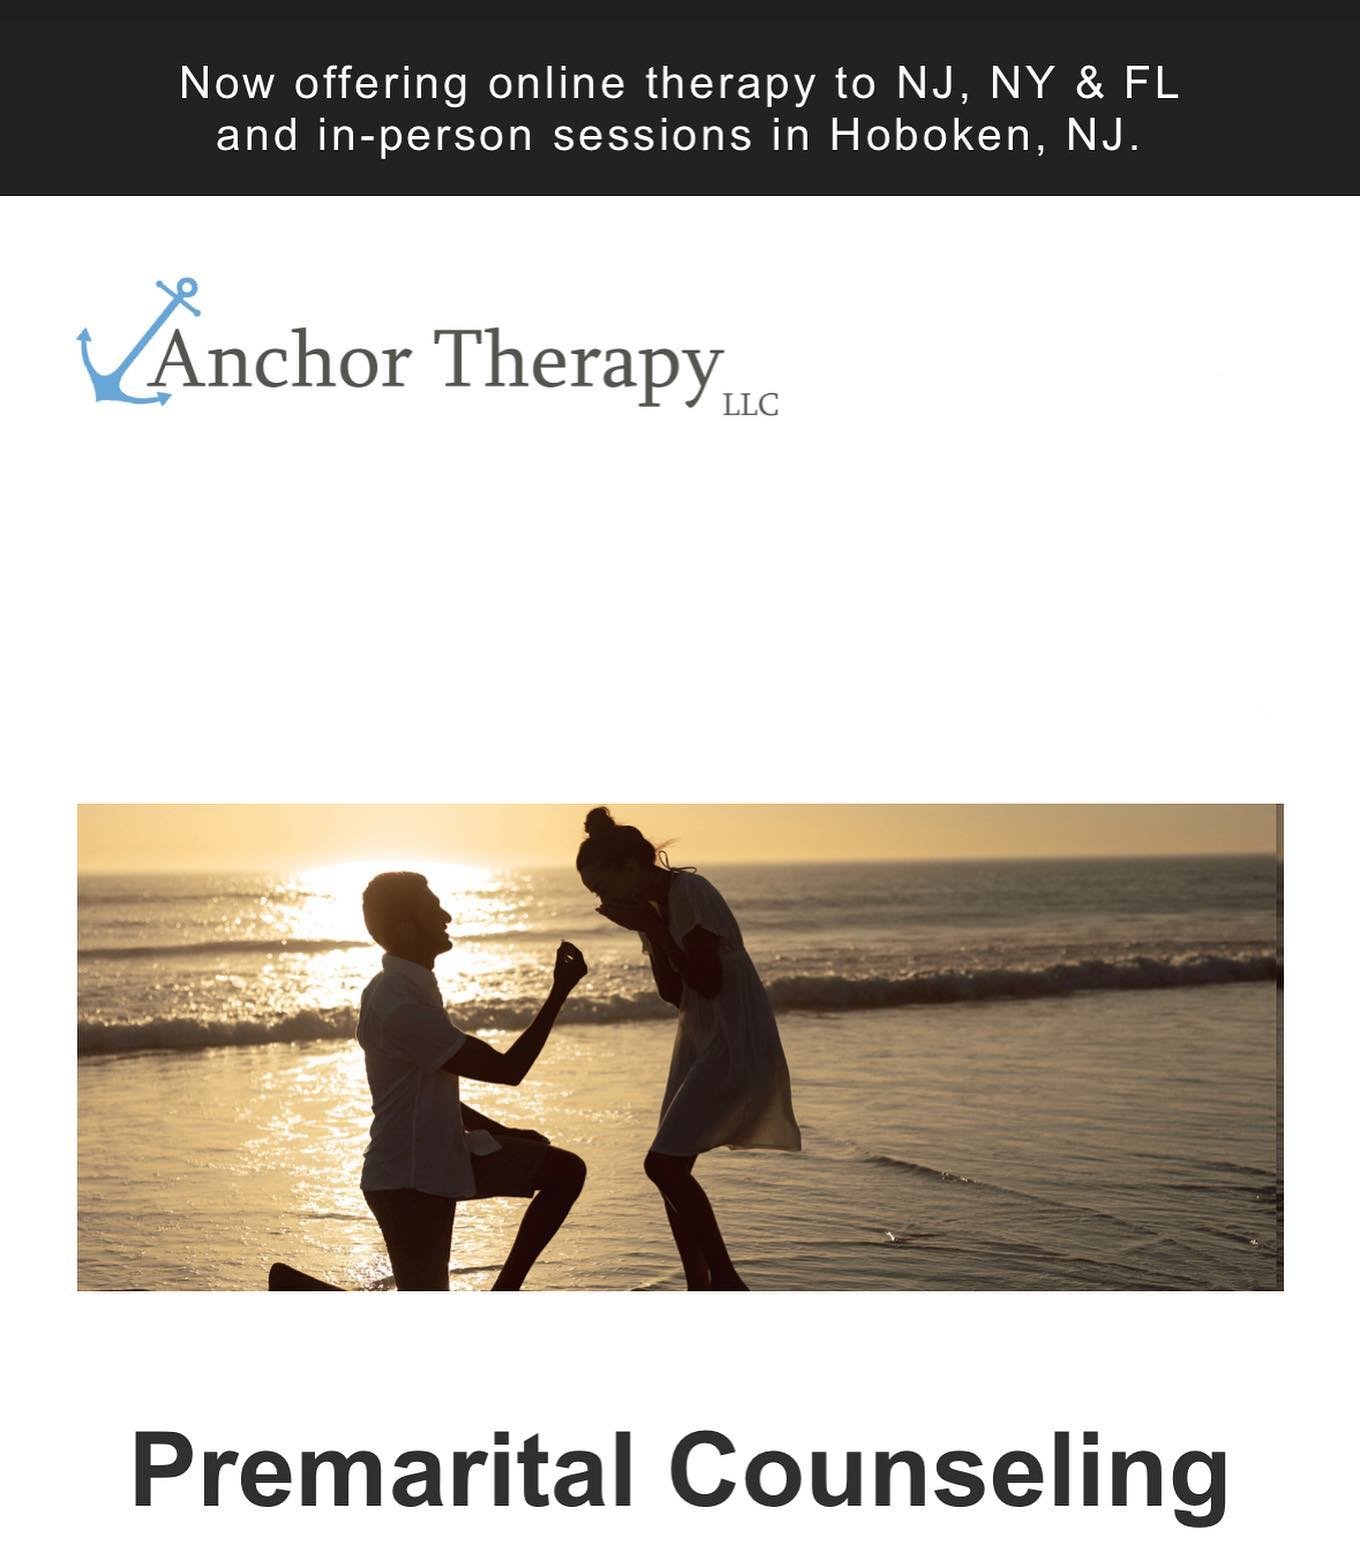 Did you know that we offer premarital therapy at Anchor Therapy? Premarital counseling typically involves several key components aimed at preparing couples for a healthy and successful marriage. 

Here are some common elements:

⚓Communication Skills